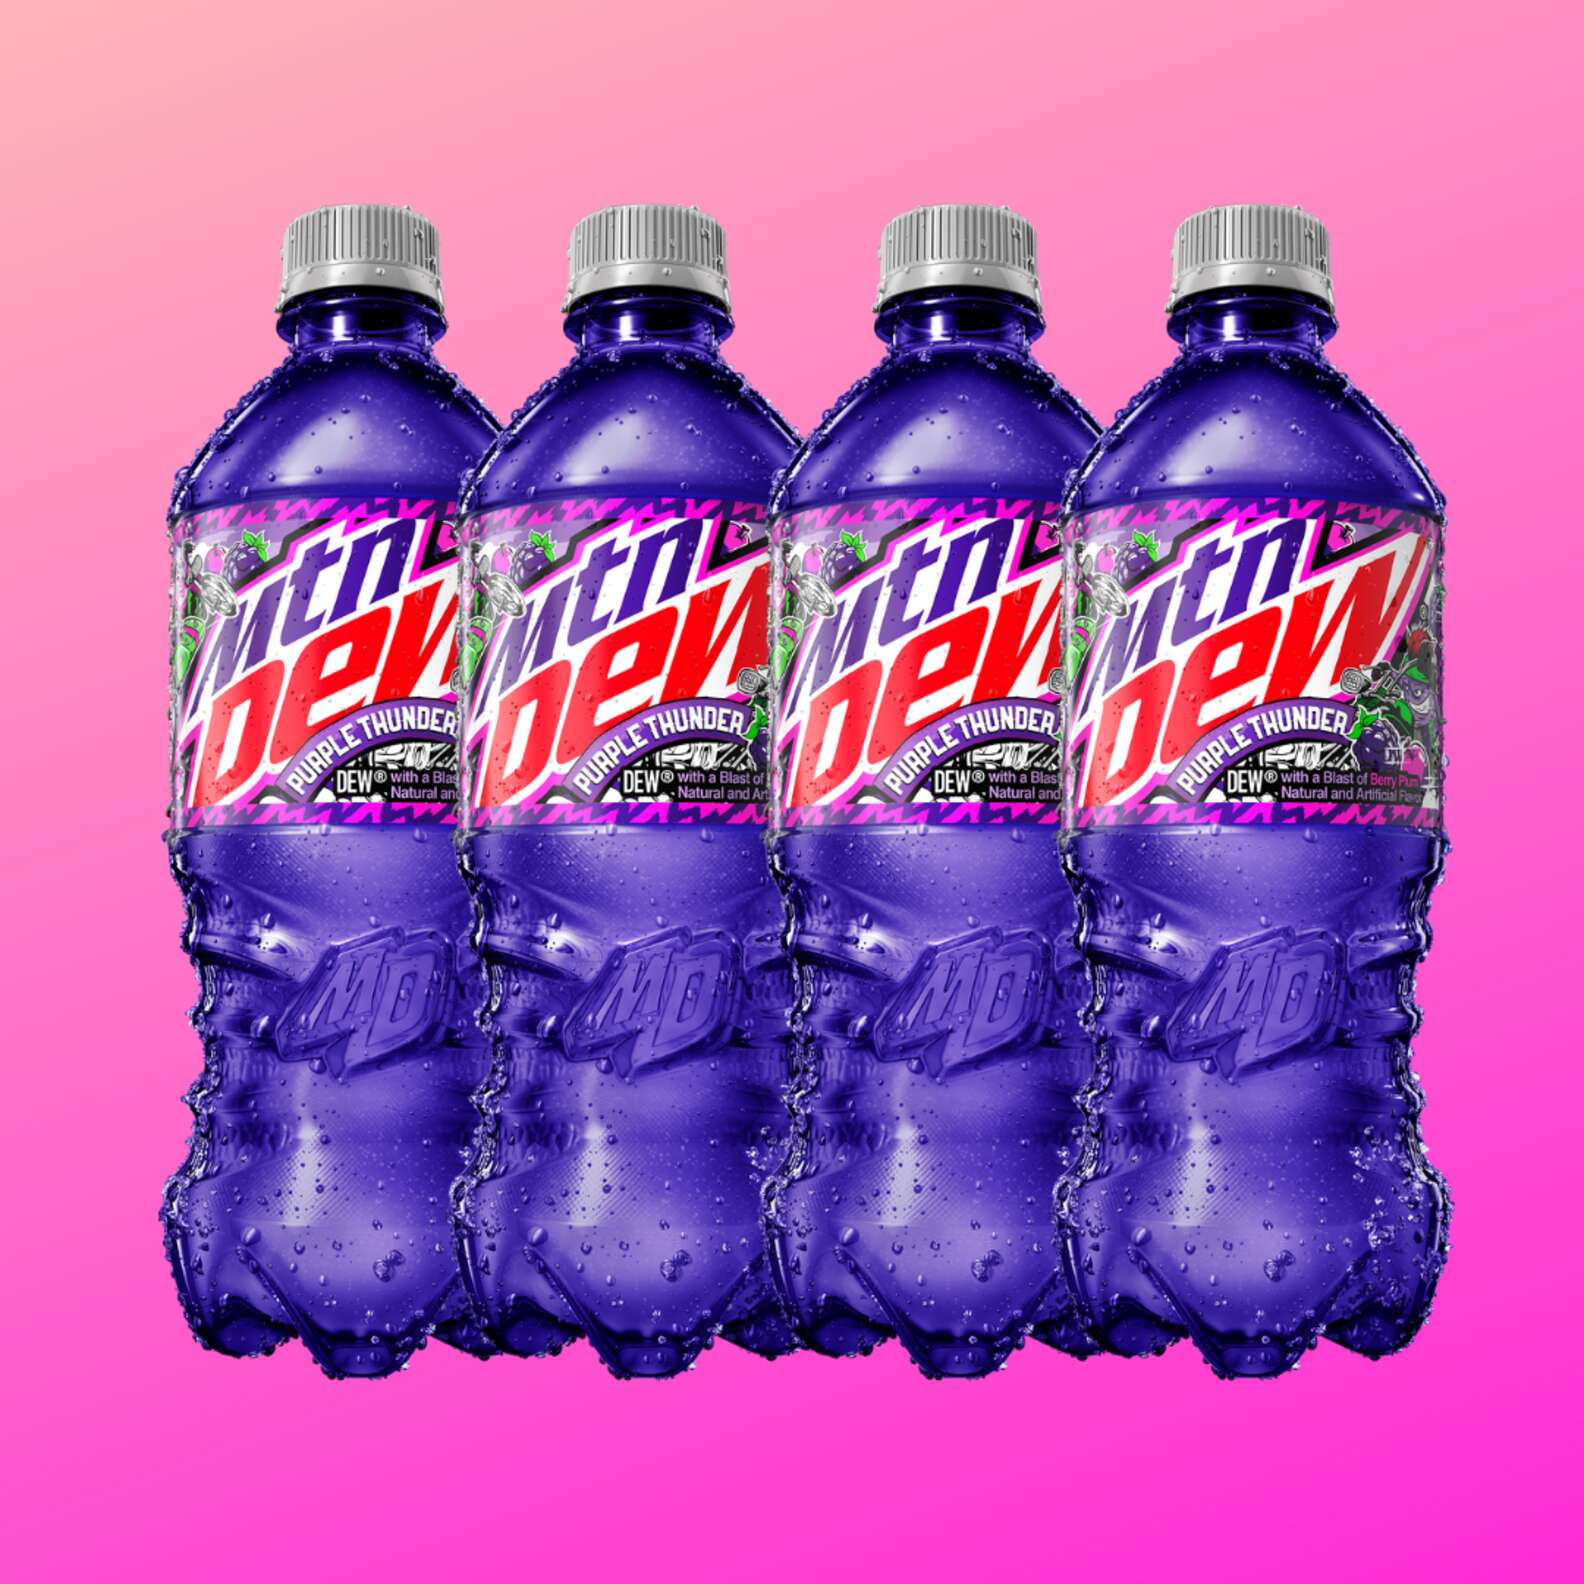 Mtn Dew Has a New Flavor That Tastes Like Blackberries and Plums